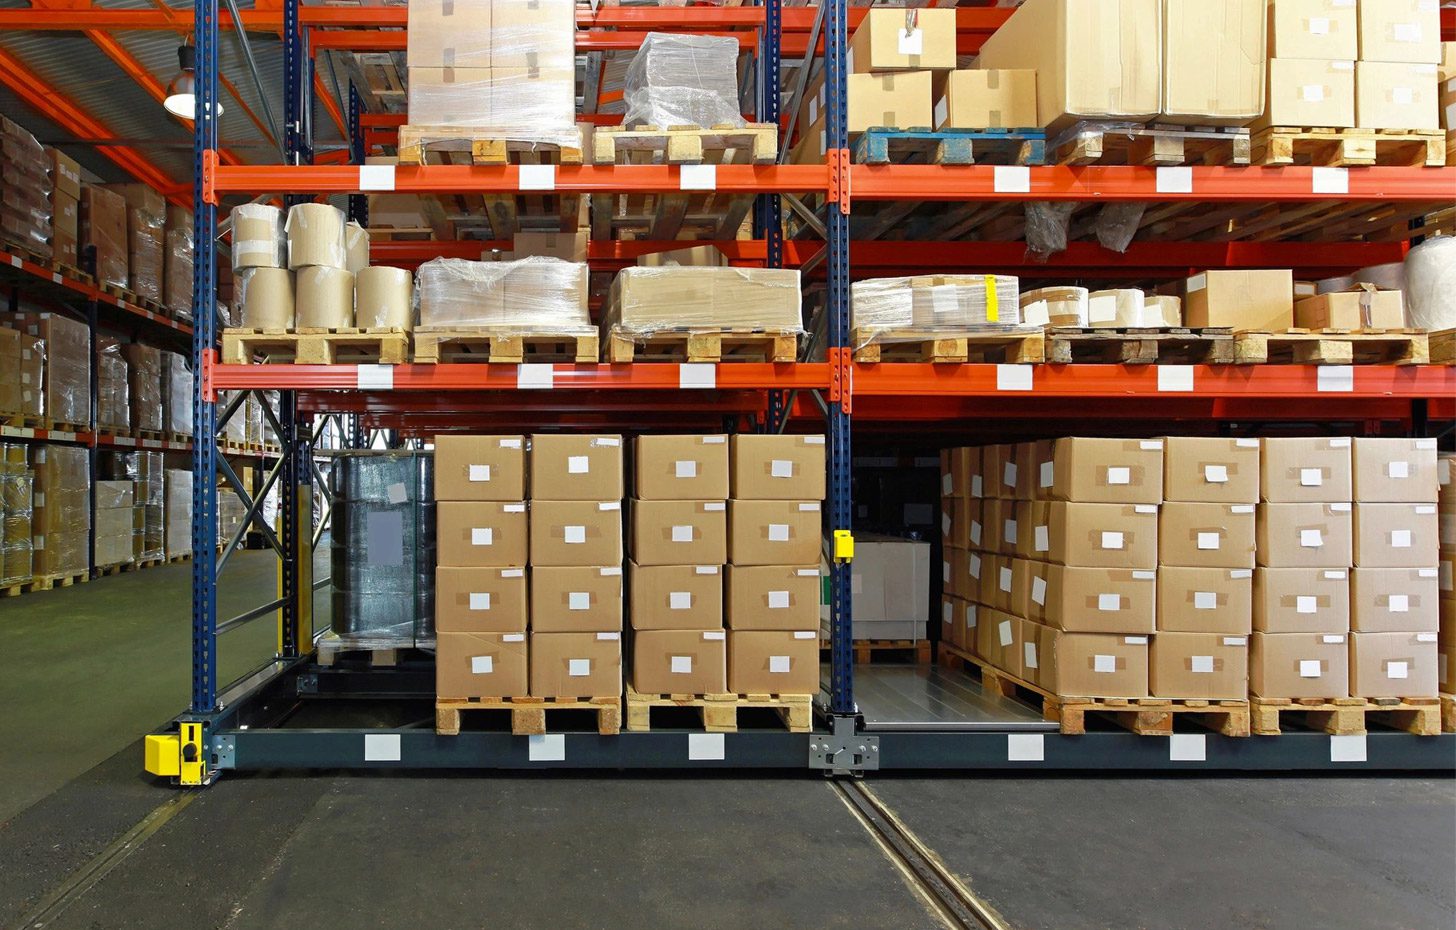 A warehouse filled with boxes and shelves of goods.